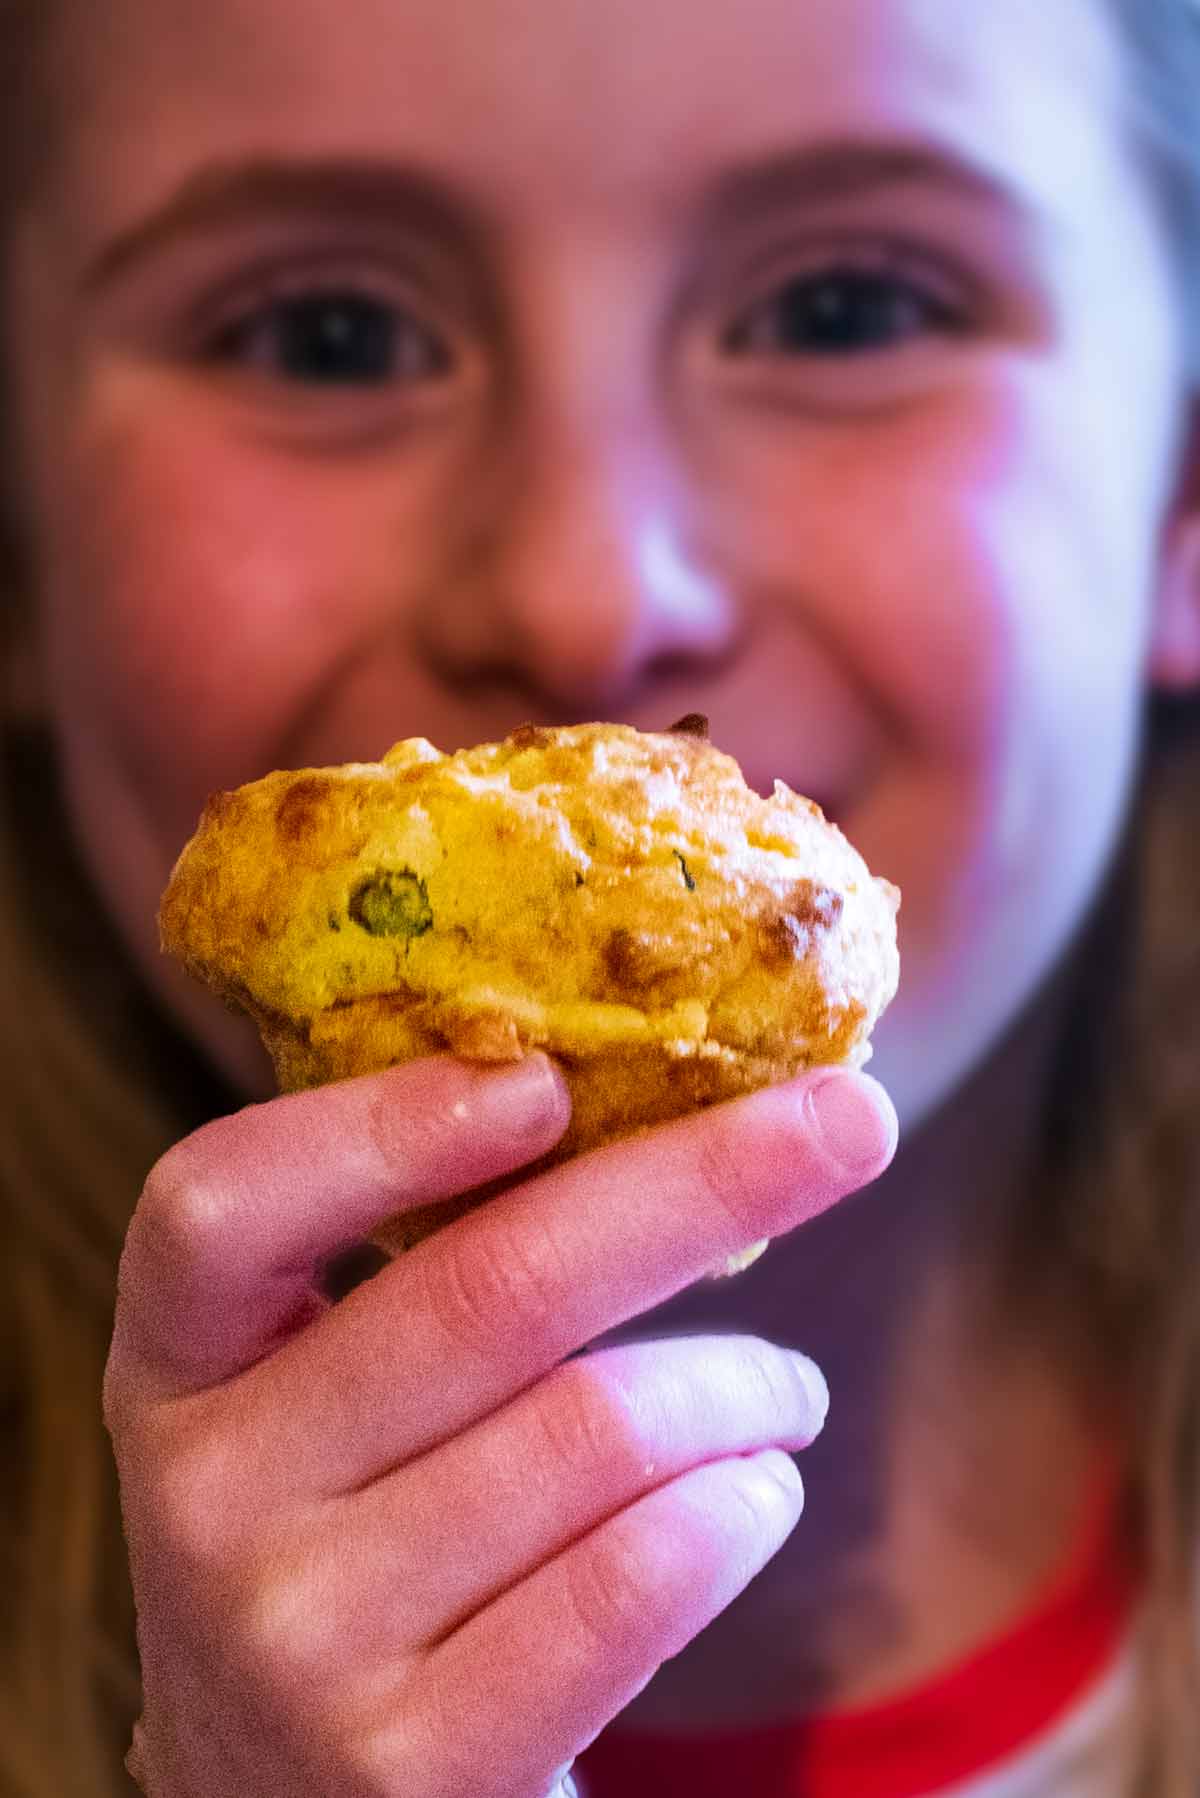 A female child holding a muffin in front of her face.